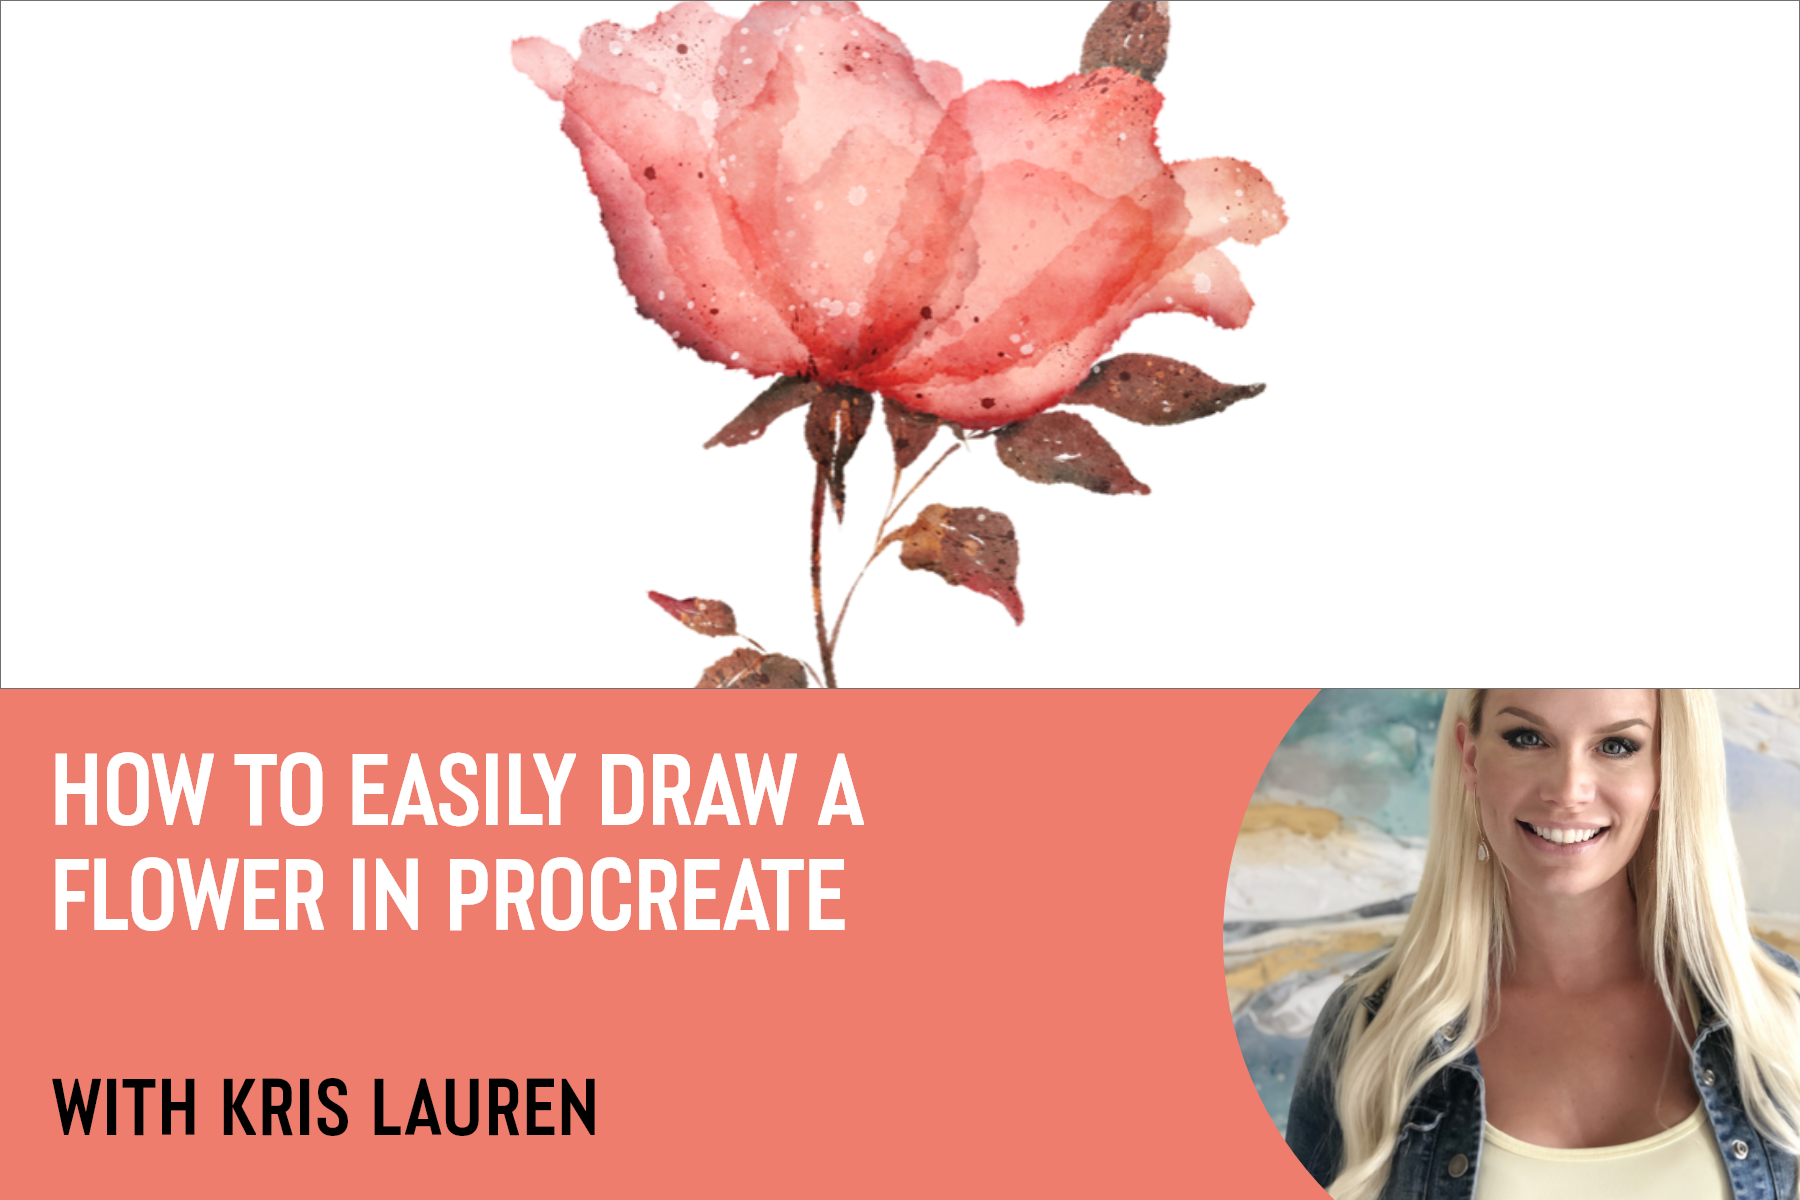 How to Easily Draw A Flower in Procreate with Kris Lauren